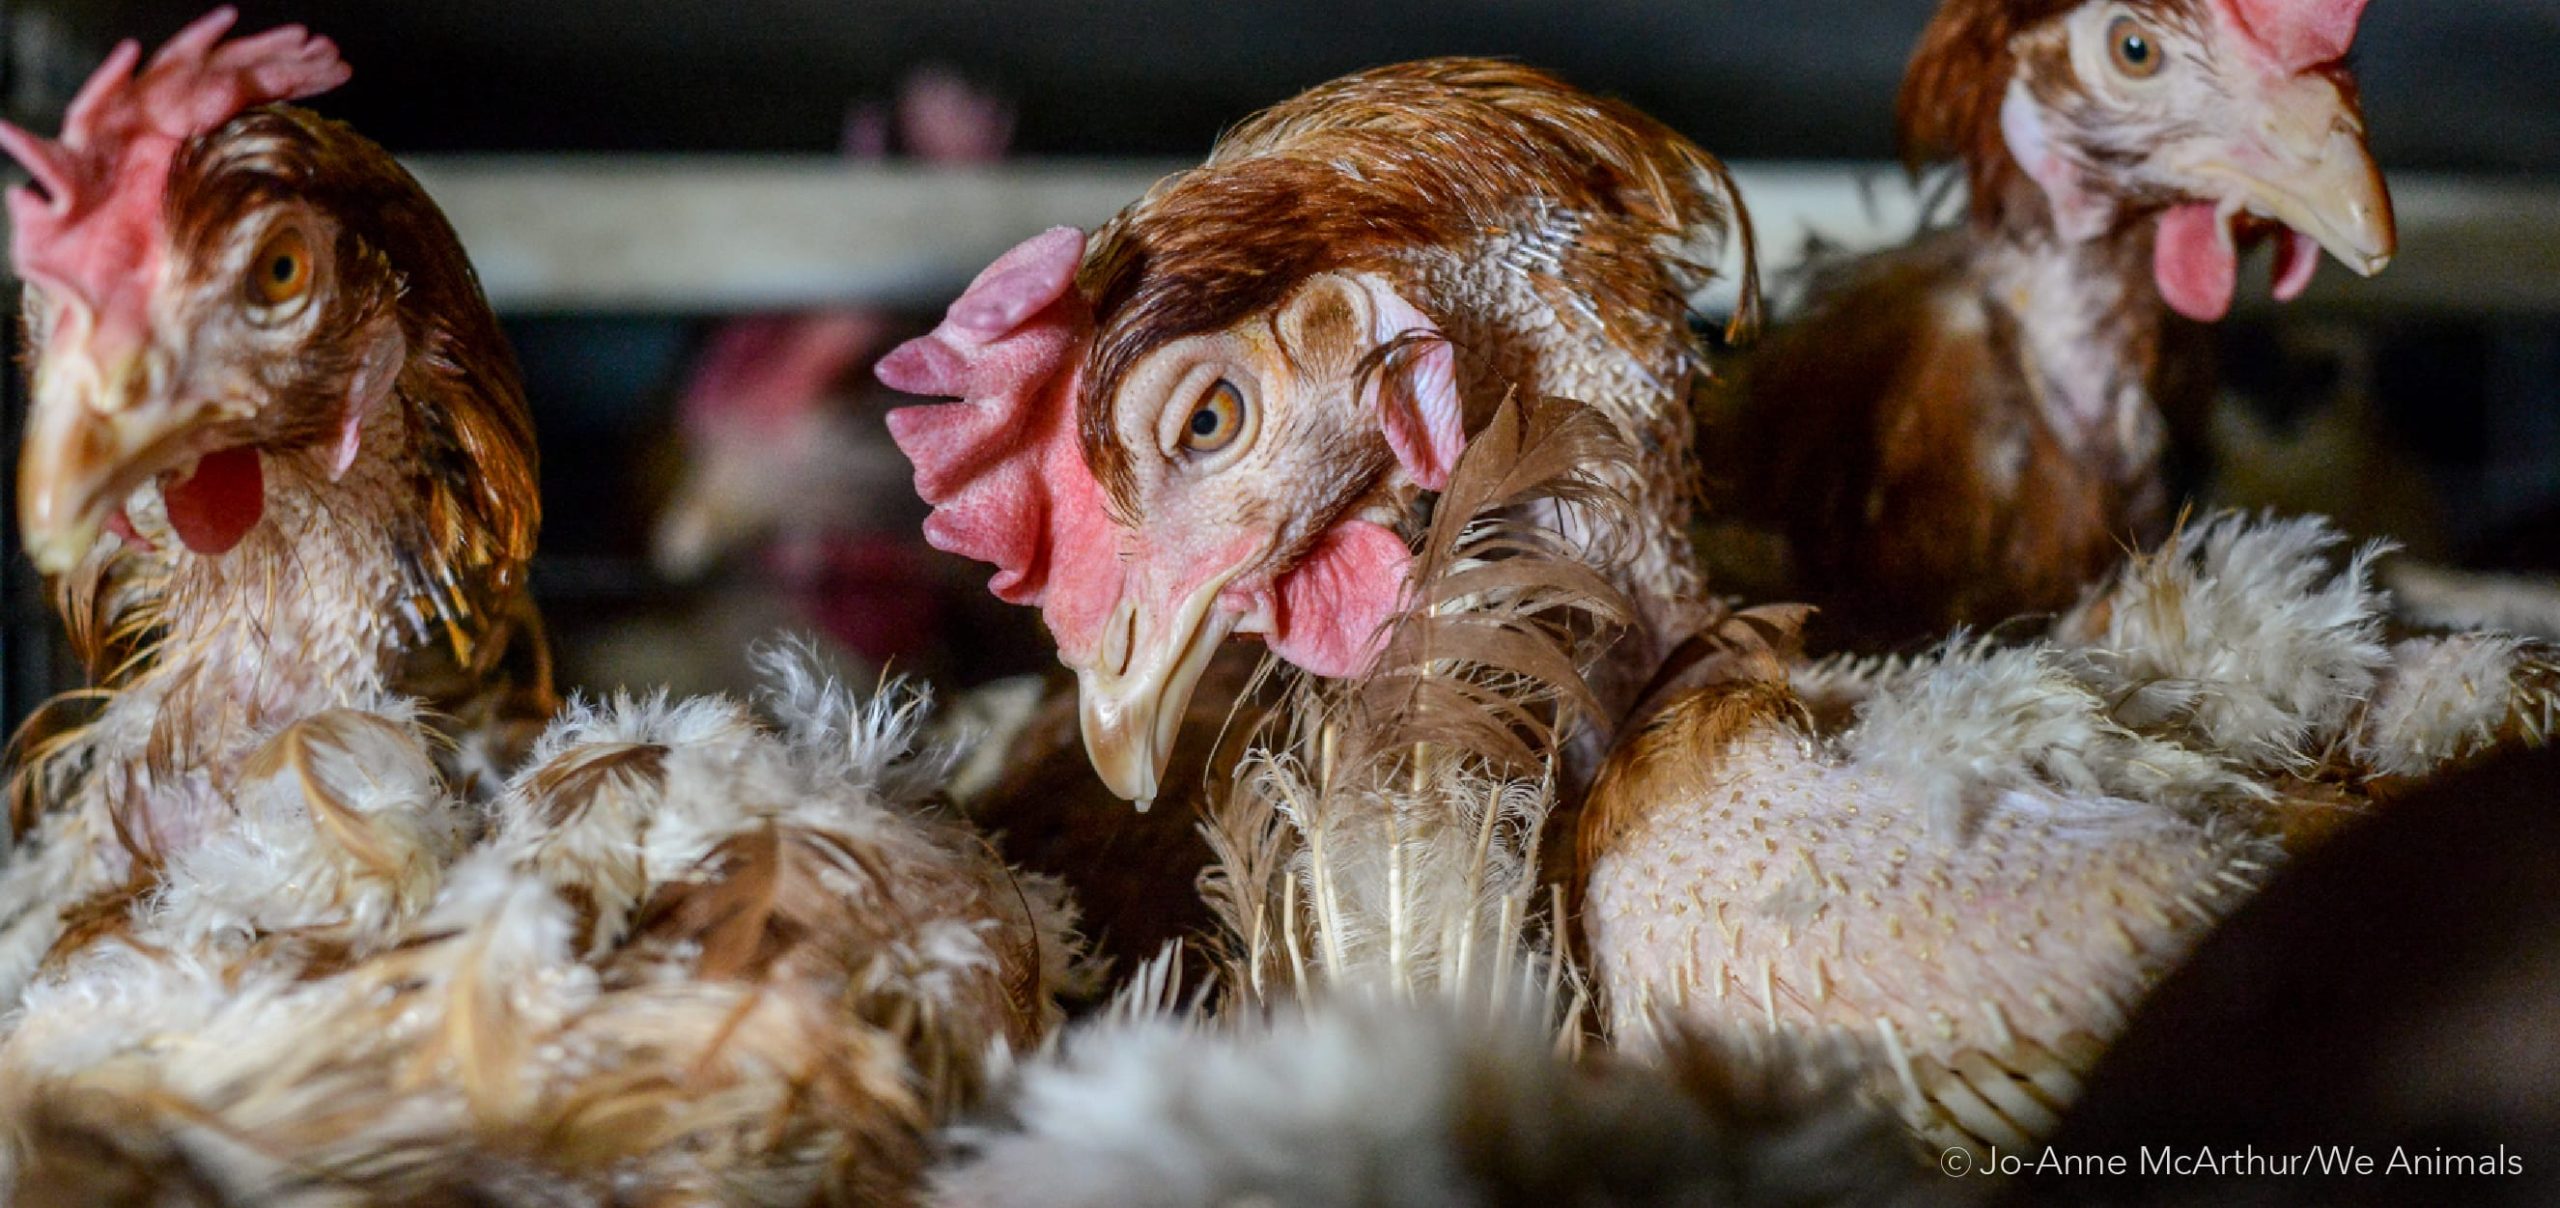 Canada Slaughtered 834 Million Animals in 2019 - Animal Justice